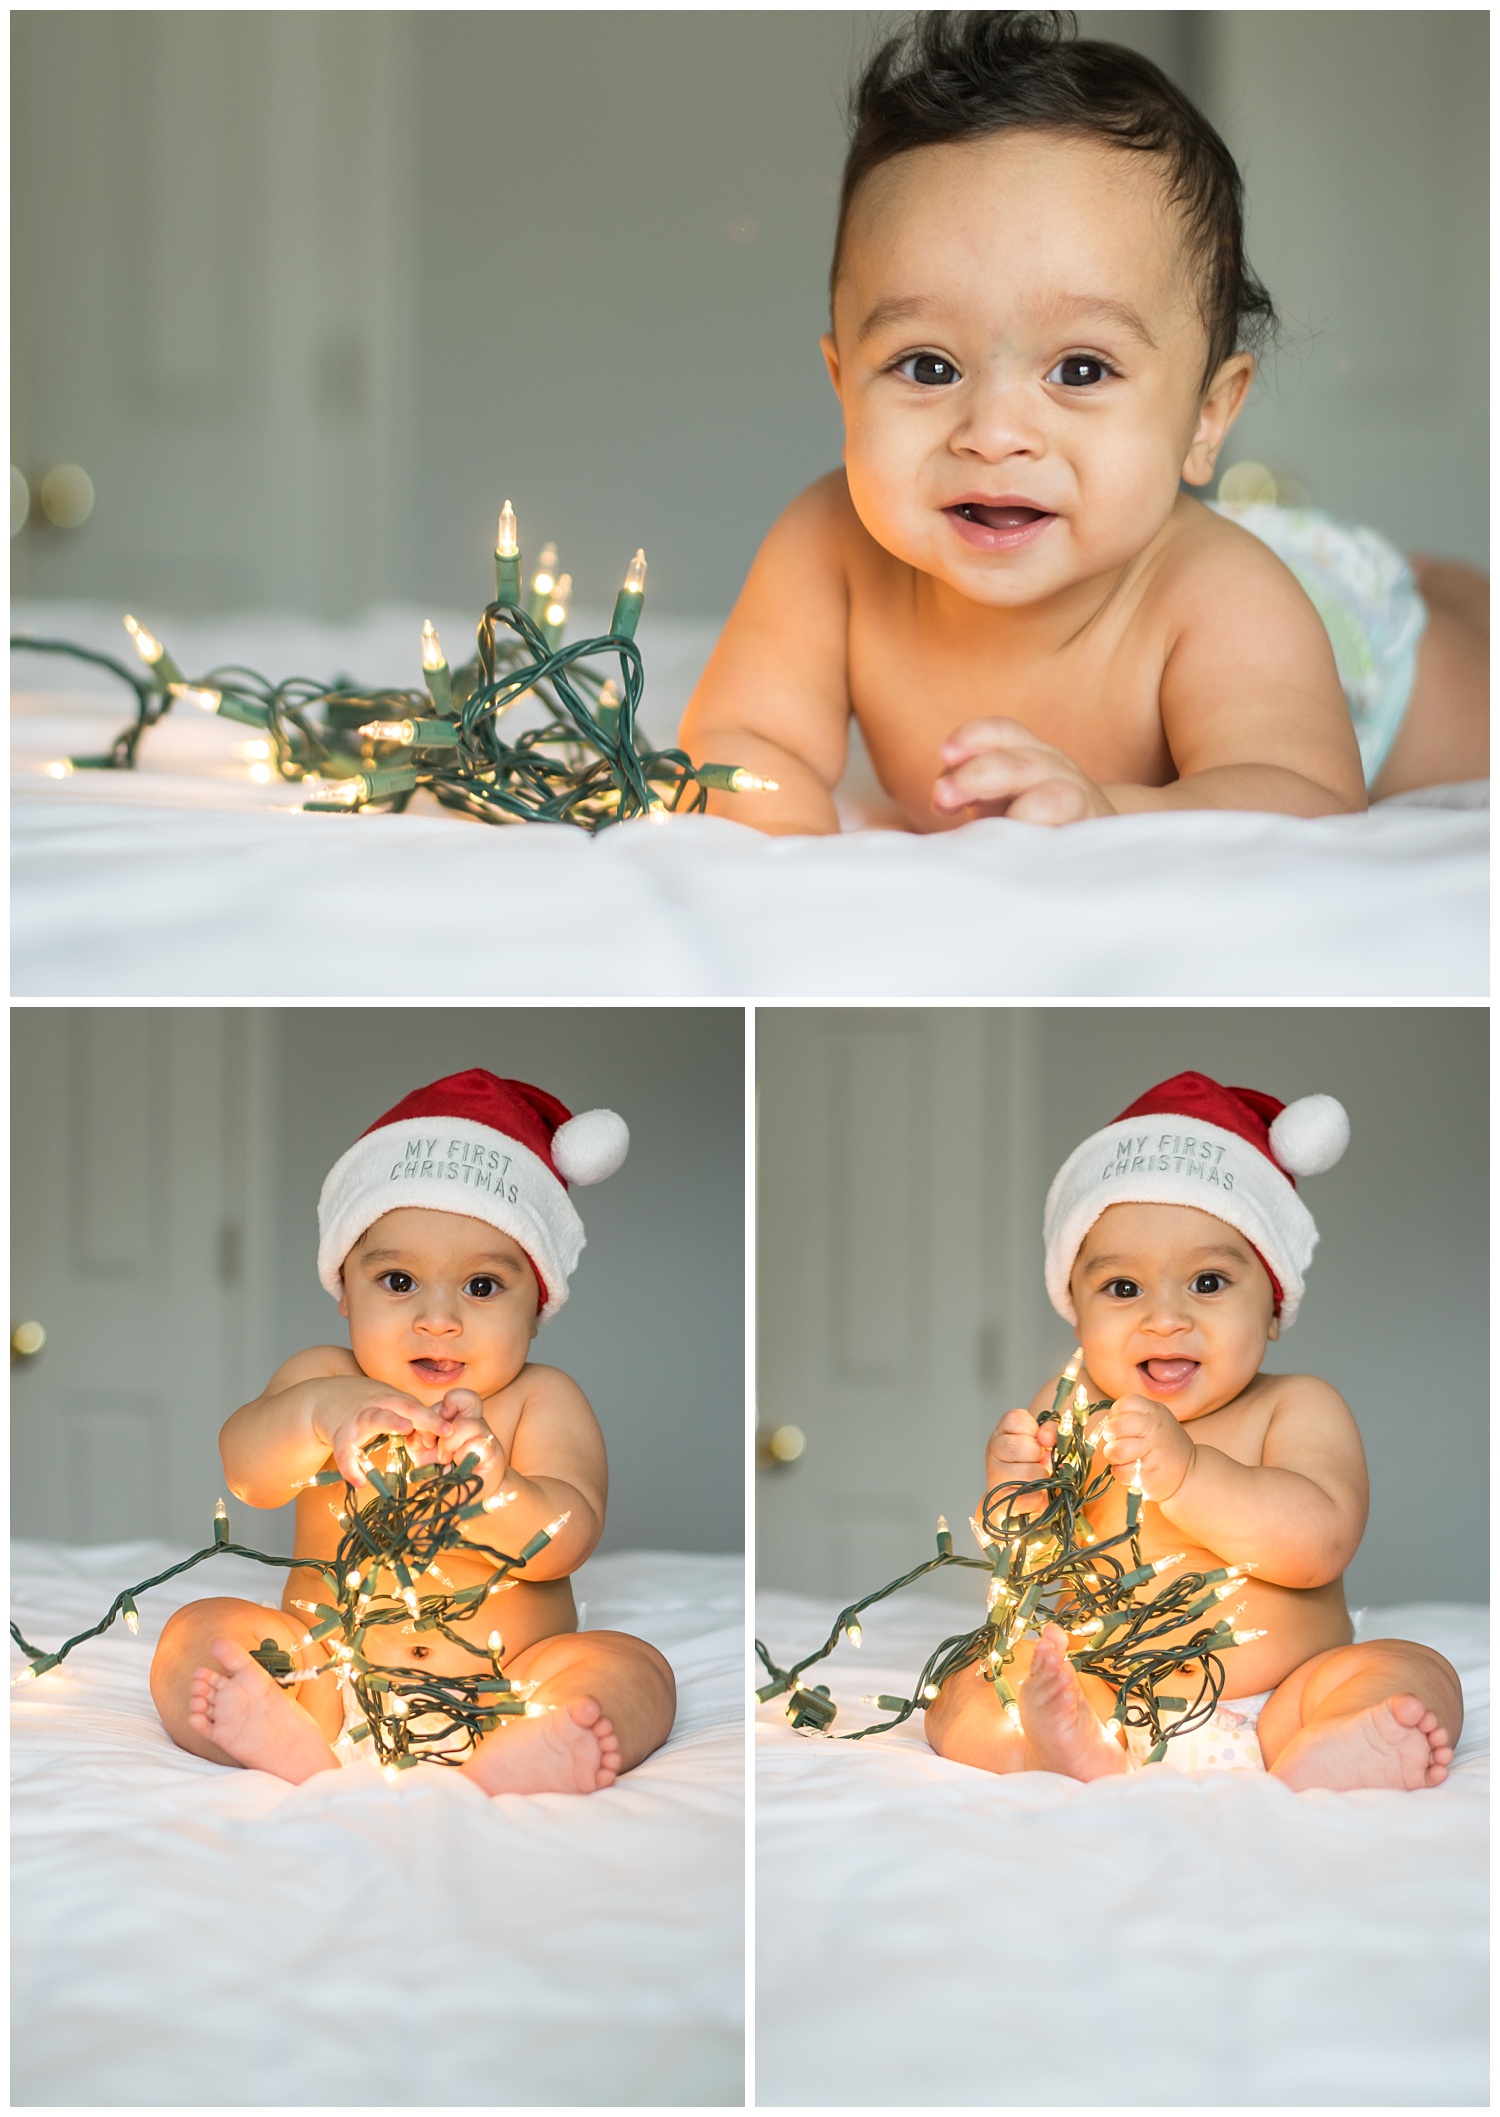 these are images of a six month old wearing a christmas hat and playing with christmas lights on the bed